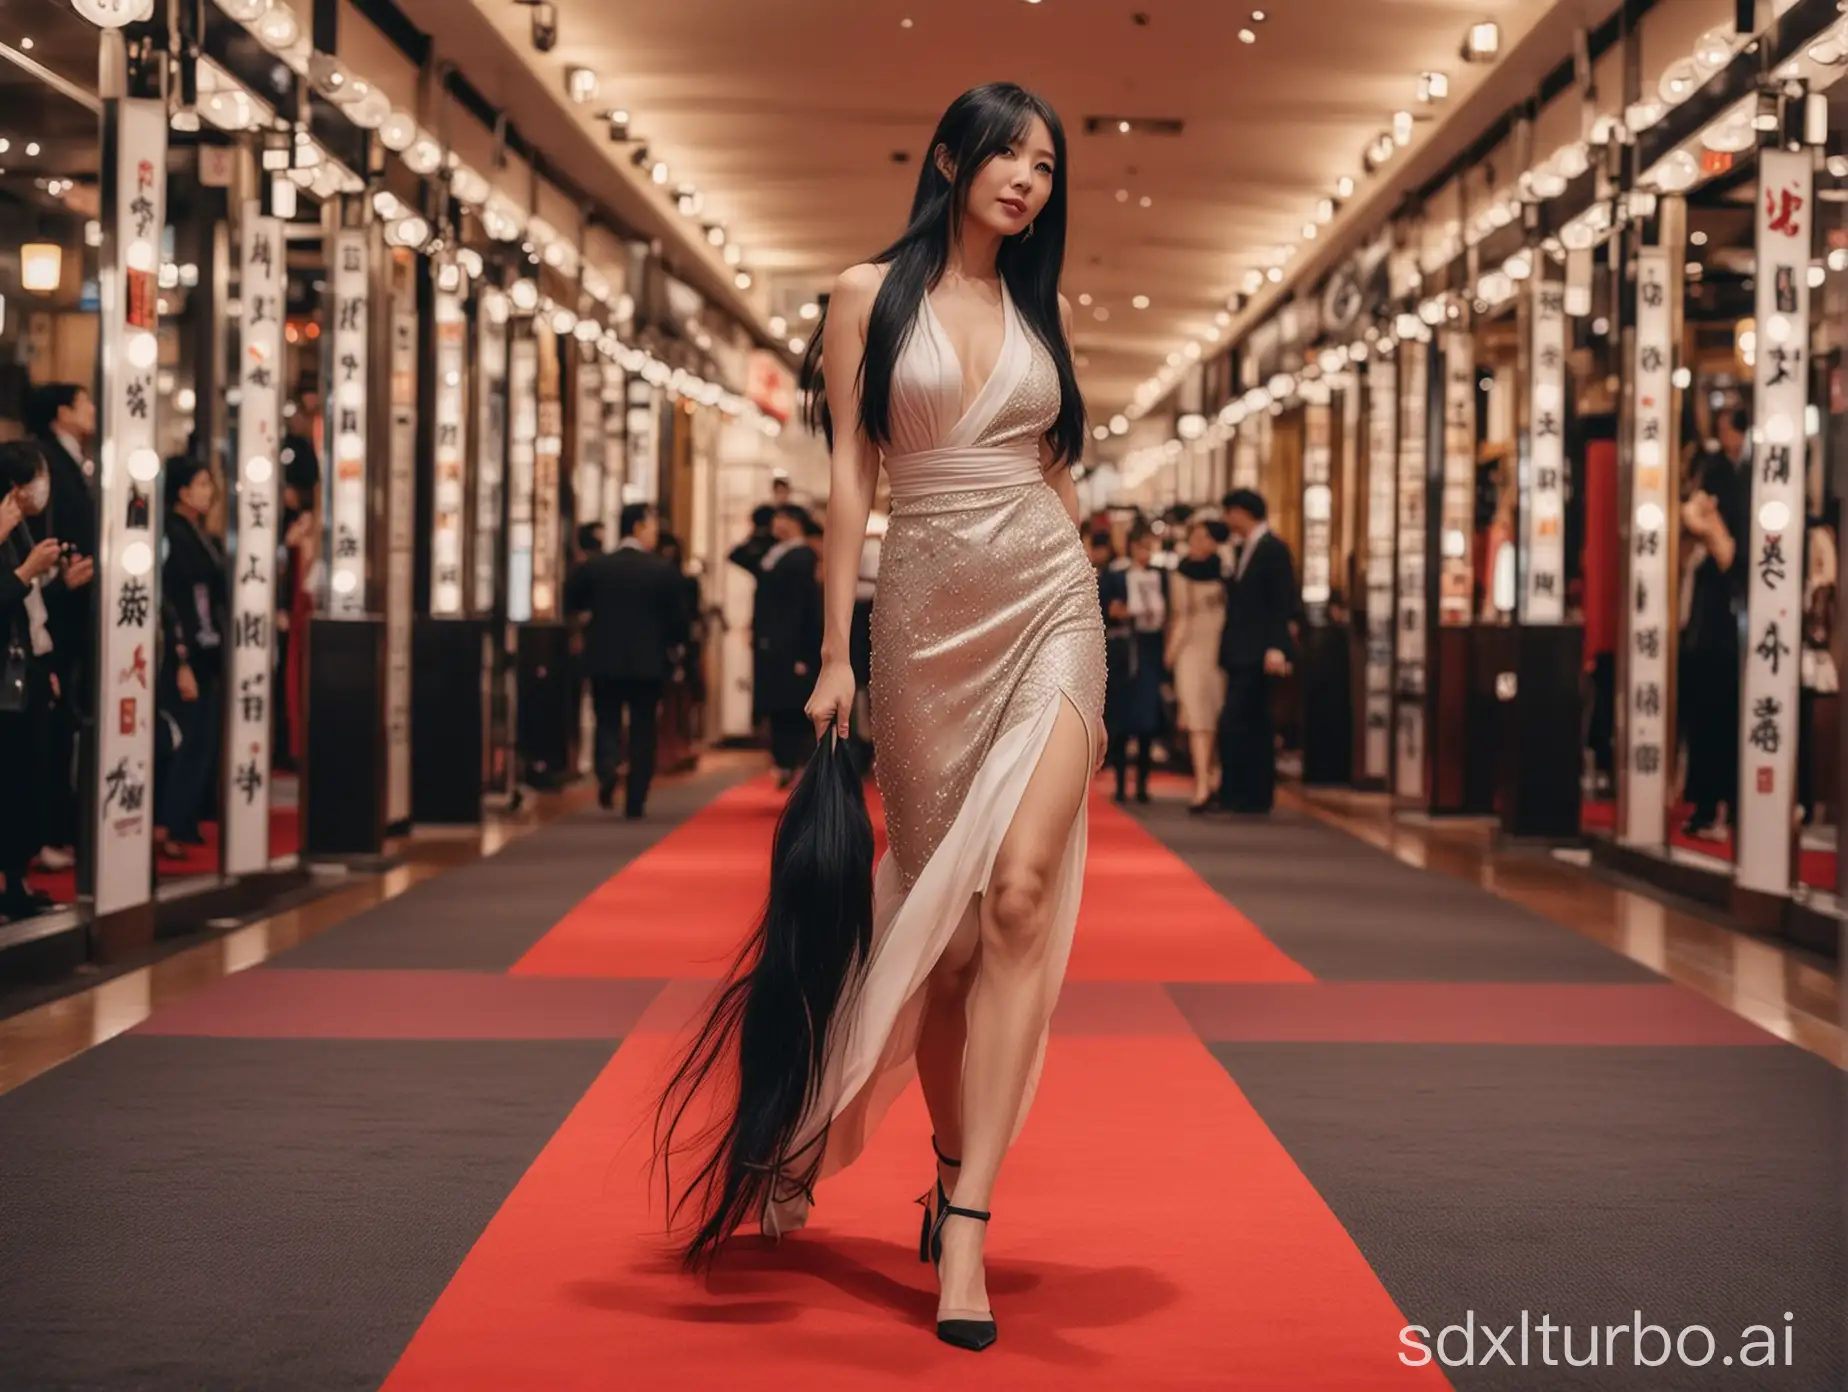 beautiful intellectual typical Japanese 33-year-old girl walks on the red carpet in fashionable attire, Instagram model, long black hair, warm, black eyes, height 6.5 feets, female, masterpiece, 4k, correct fingers or hands